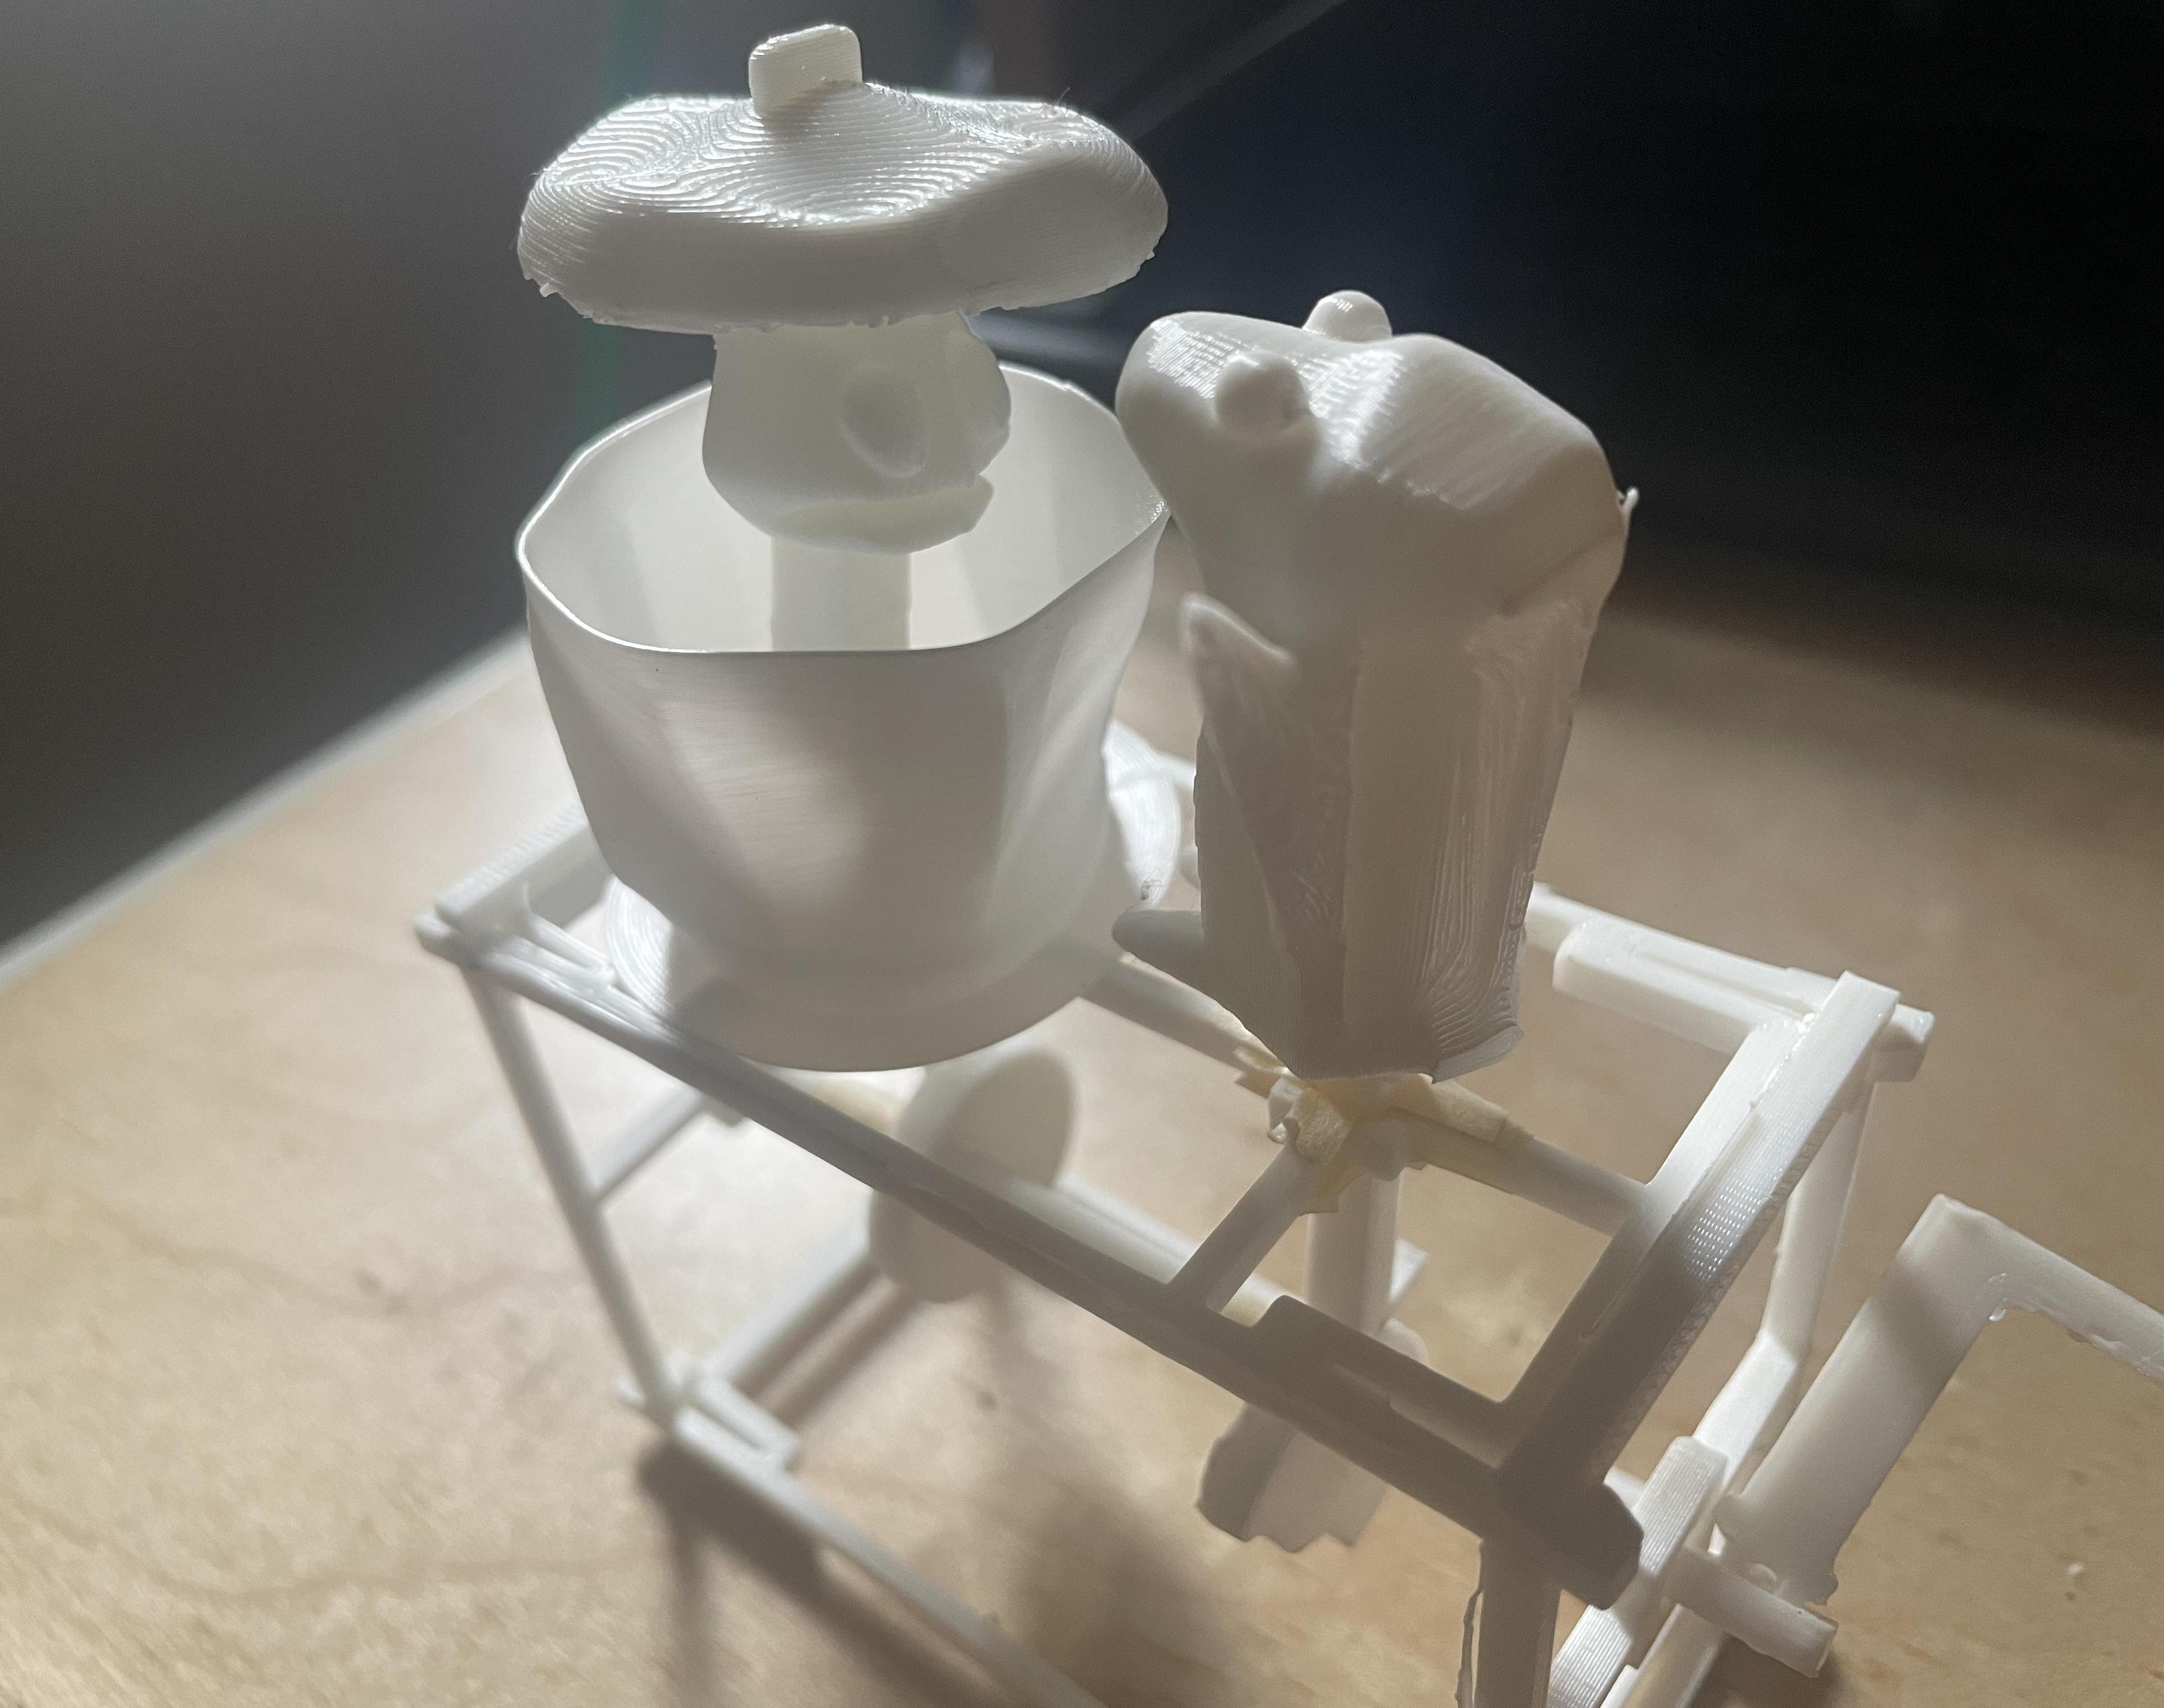 3d Printed Cam Toy